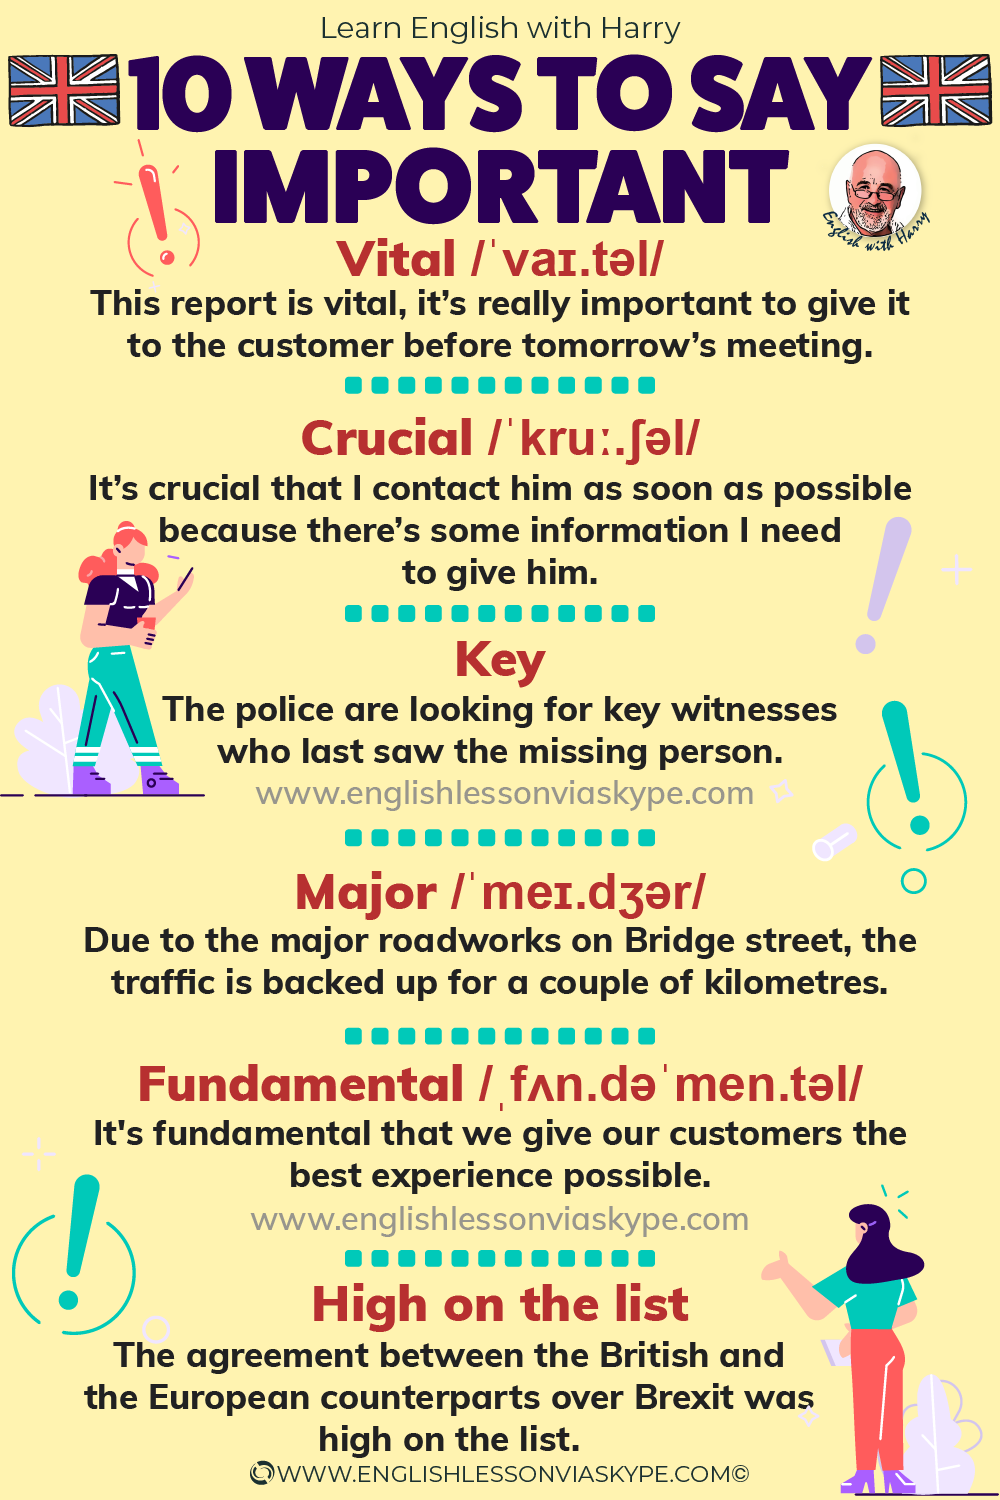 English vocabulary: 10 other ways to say important in English. From intermediate to advanced English at www.englishlessonviaskype.com #learnenglish #englishlessons #EnglishTeacher #vocabulary #ingles #อังกฤษ #английский #aprenderingles #english #cursodeingles #учианглийский #vocabulário #dicasdeingles #learningenglish #ingilizce #englishgrammar #englishvocabulary #ielts #idiomas